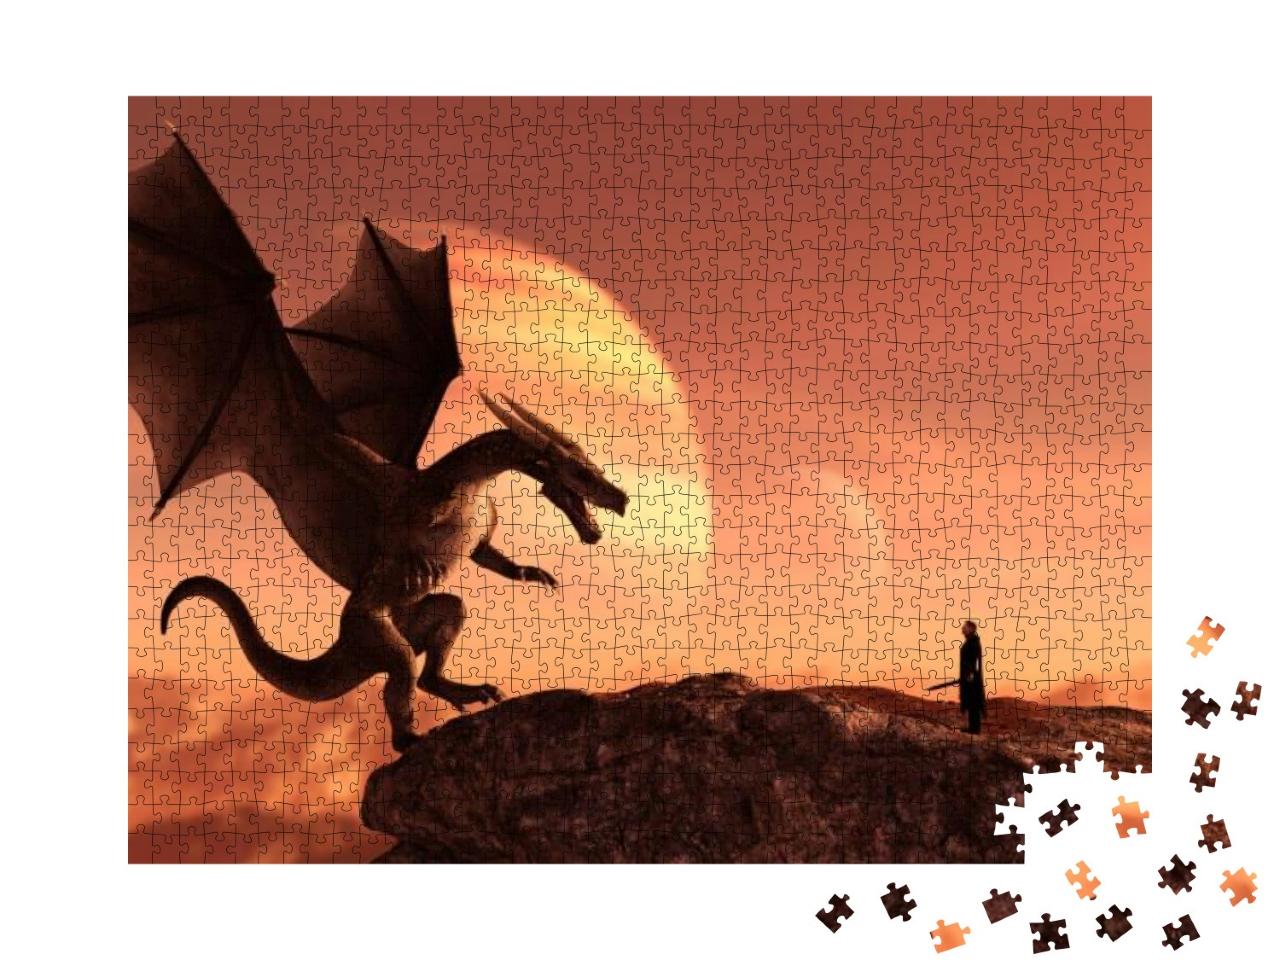 Knight & the Dragon in Magical Landscape, 3D Art Illustra... Jigsaw Puzzle with 1000 pieces